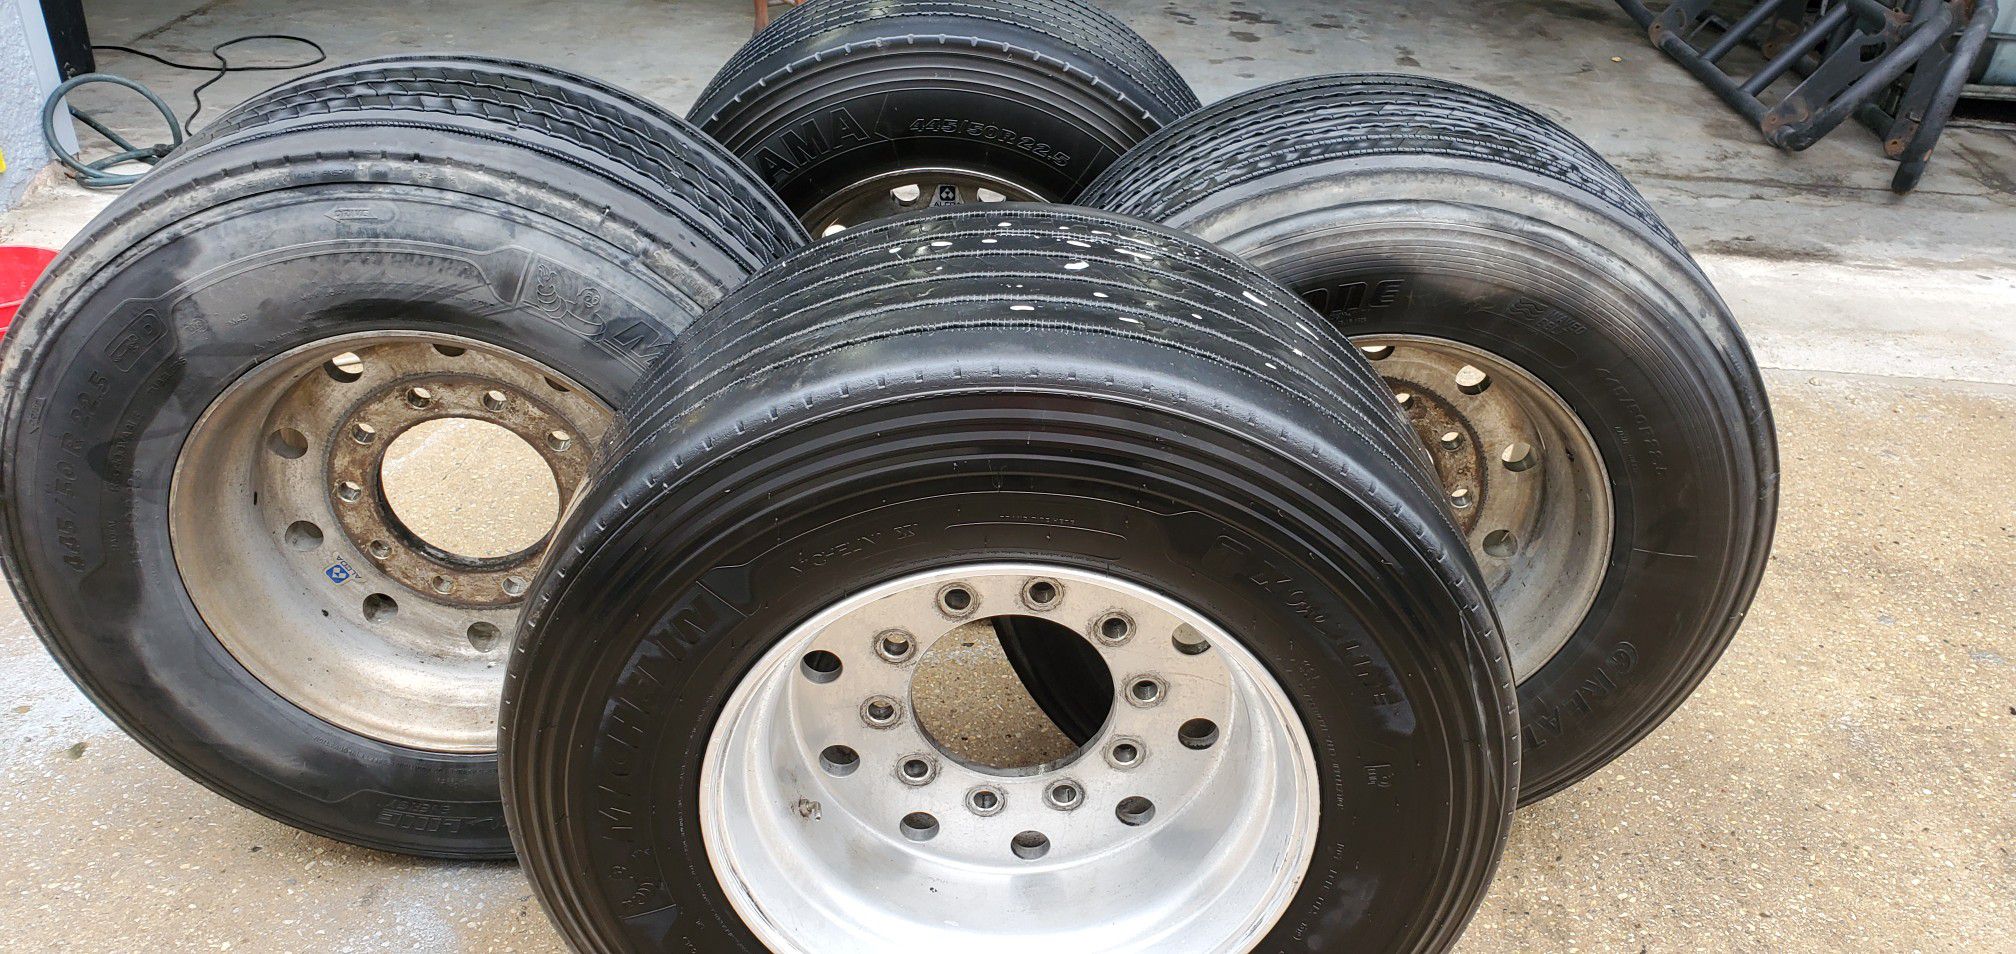 Trailer tire with rims